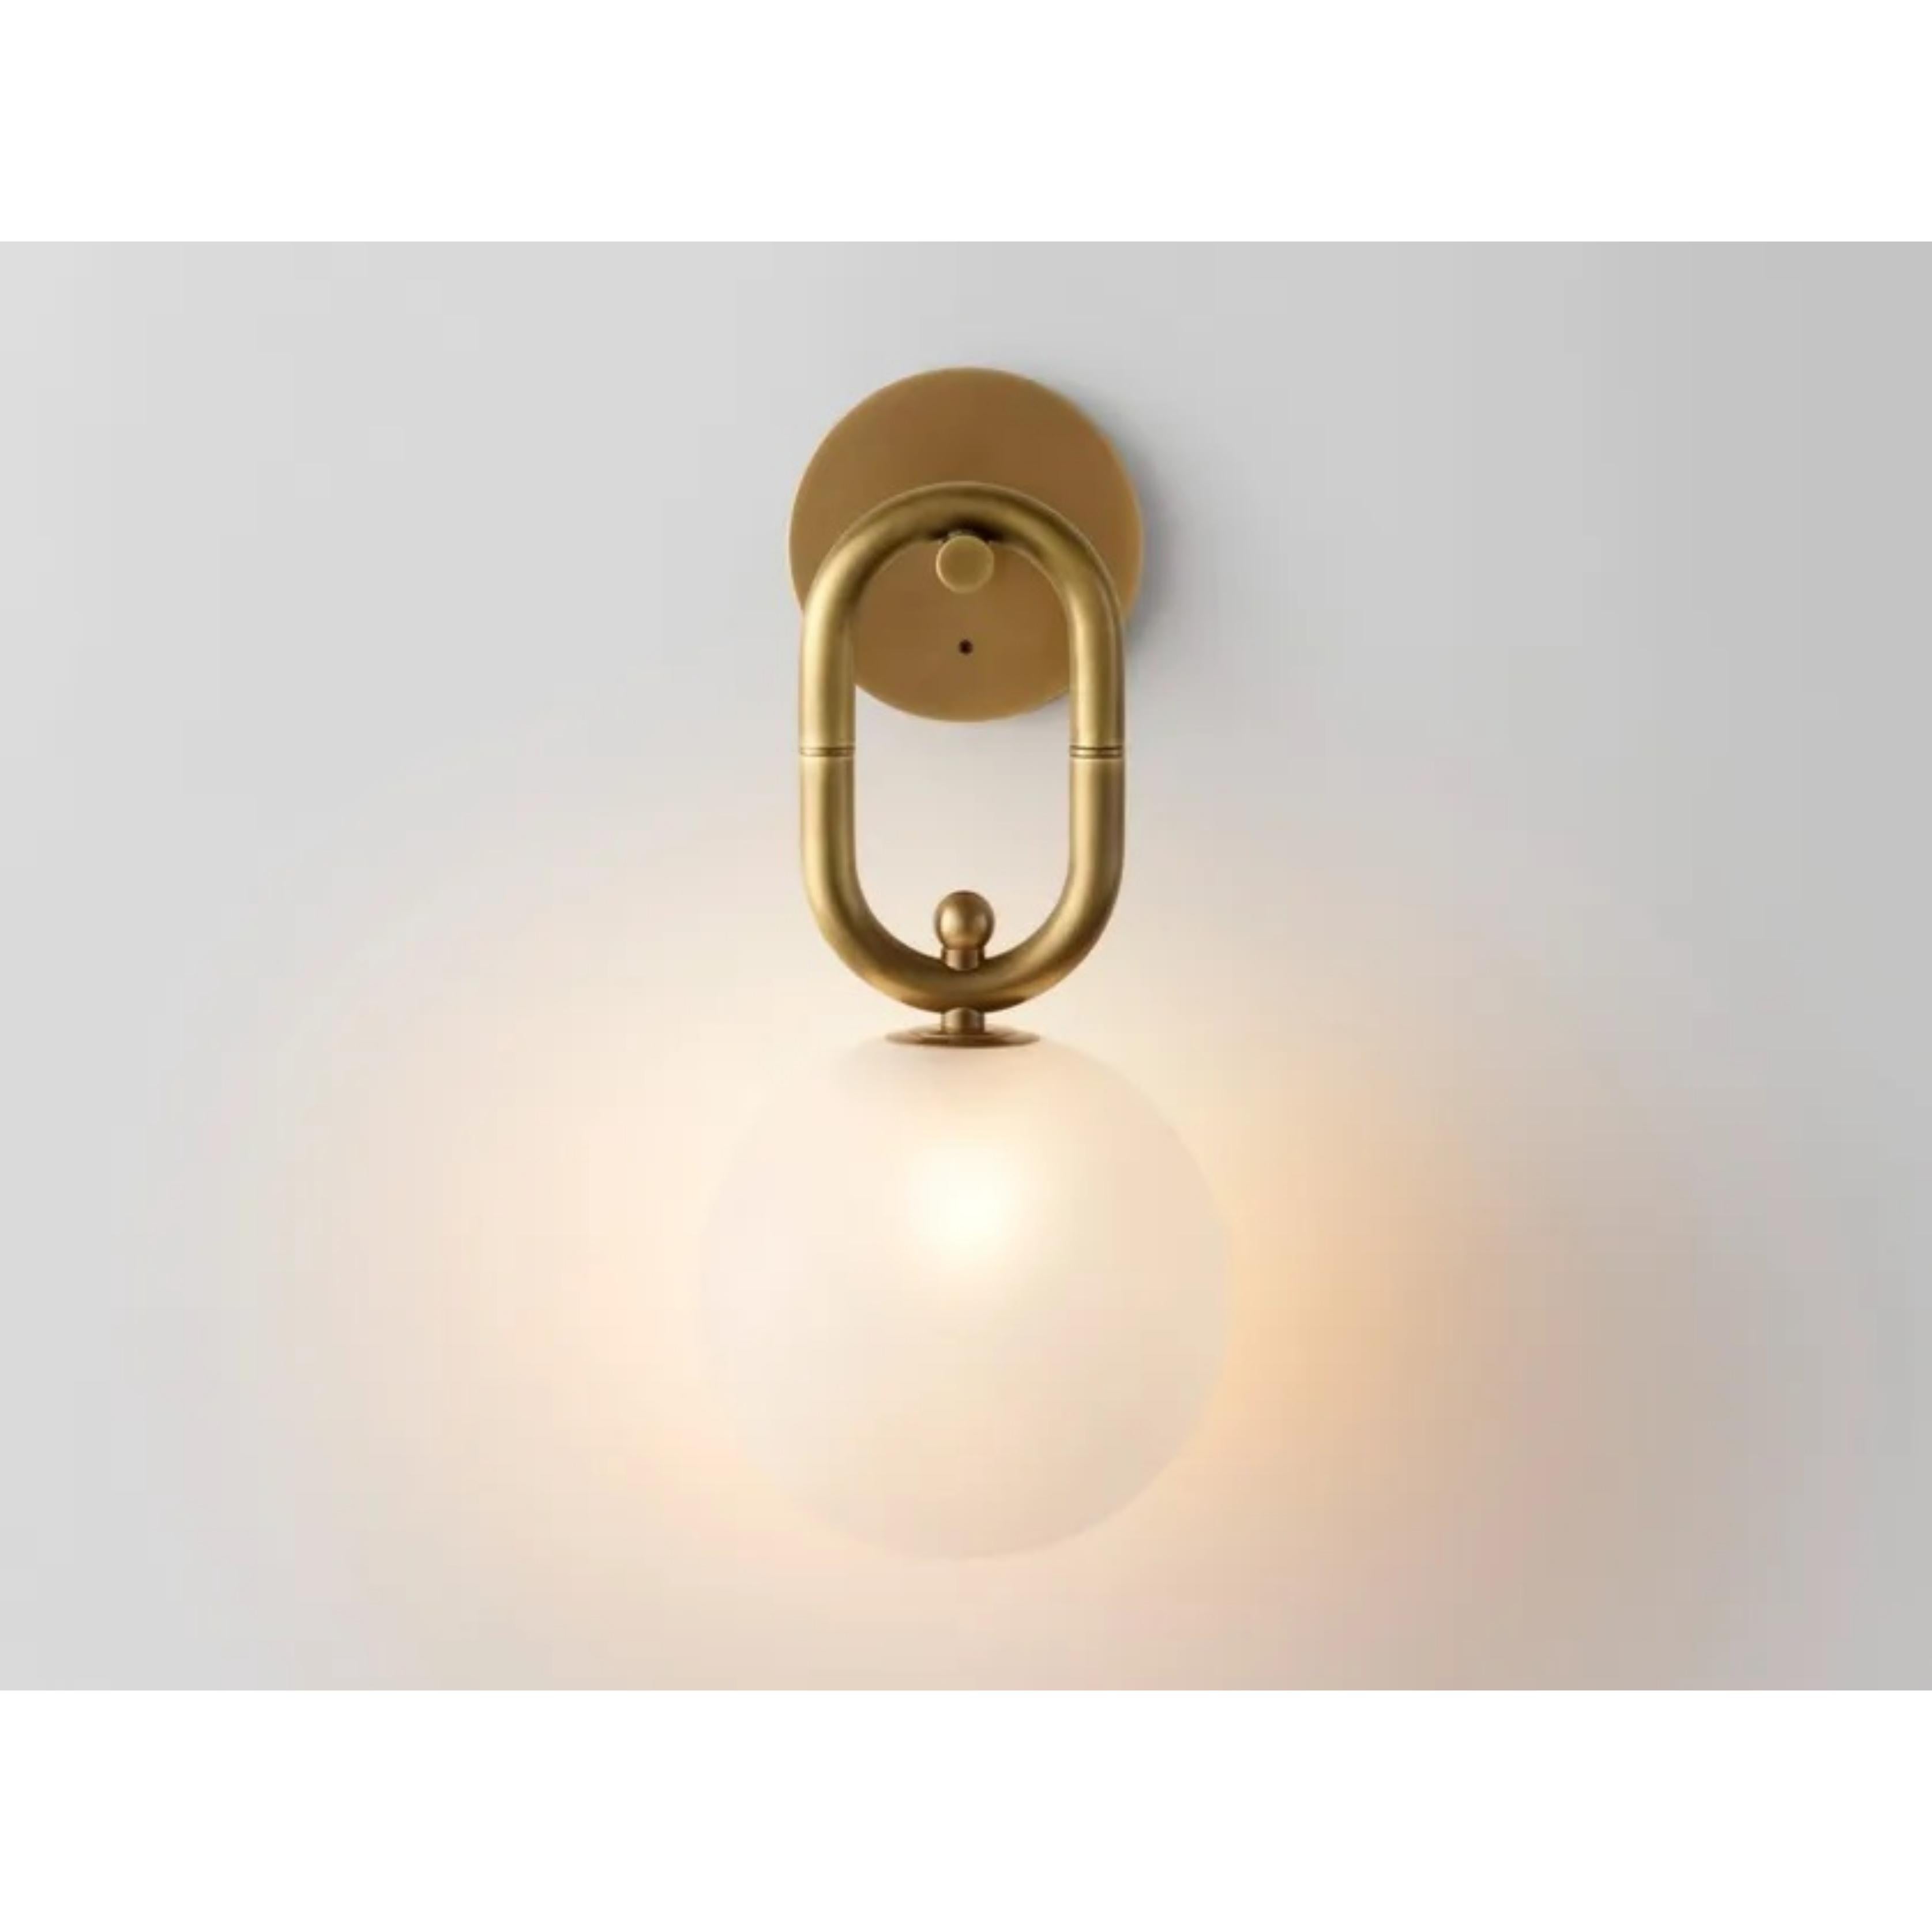 Missing link wall sconce by Volker Haug
Dimensions: Diameter 15 x height 34 cm 
Material: Brass. 
Finish: Polished,aged, brushed, bronzed, blackened, or plated
Lamp: 240V G9 LED or 12V G4 LED
Glass Shell: ø 150 mm opal or frosted
Weight: